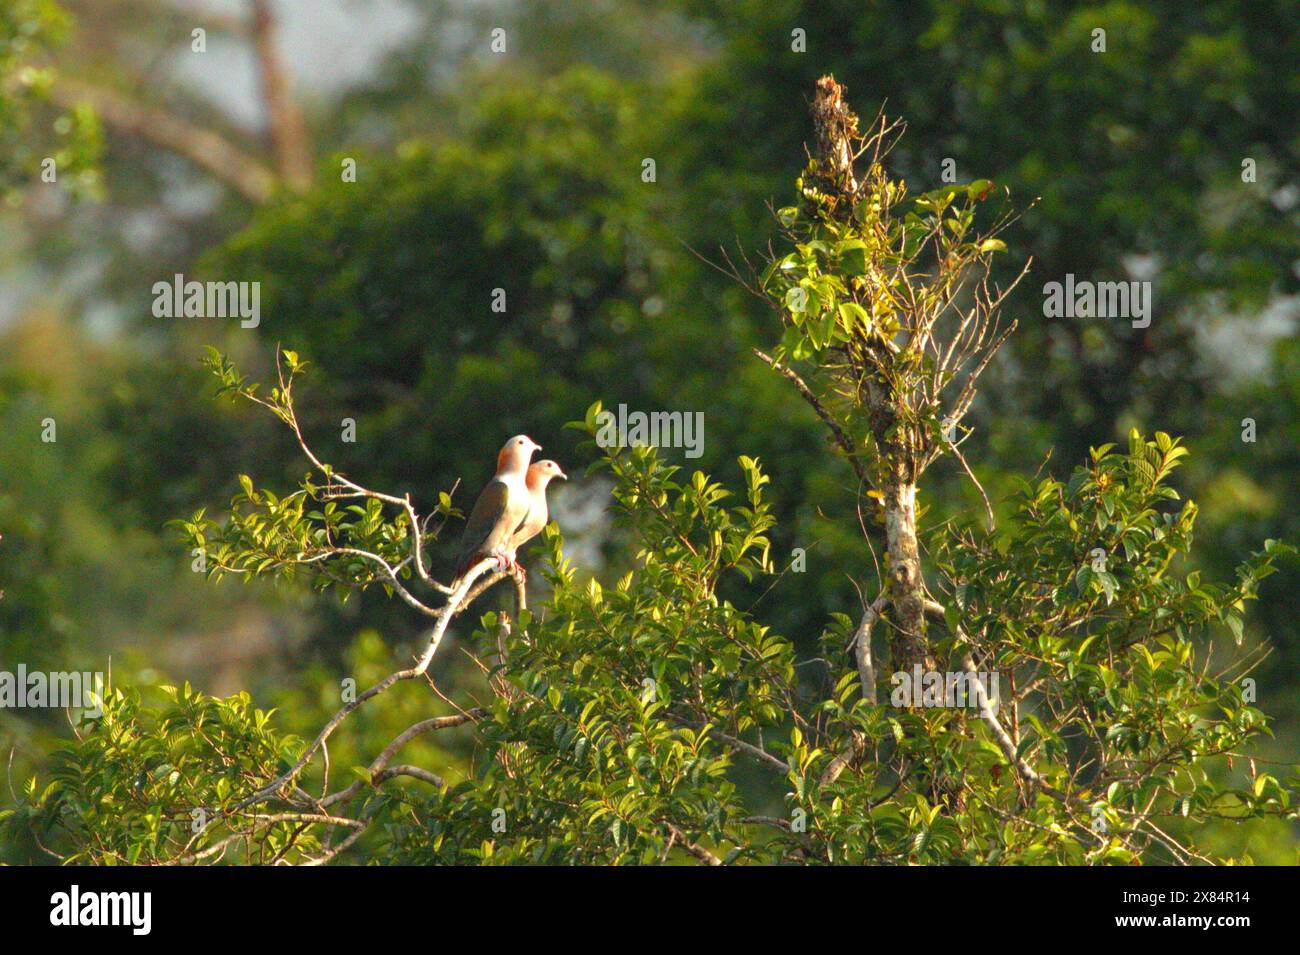 A pair of green imperial pigeon (Ducula aenea) on a tree-top near Mount Tangkoko and Mount Duasudara in Bitung, North Sulawesi, Indonesia. Stock Photo